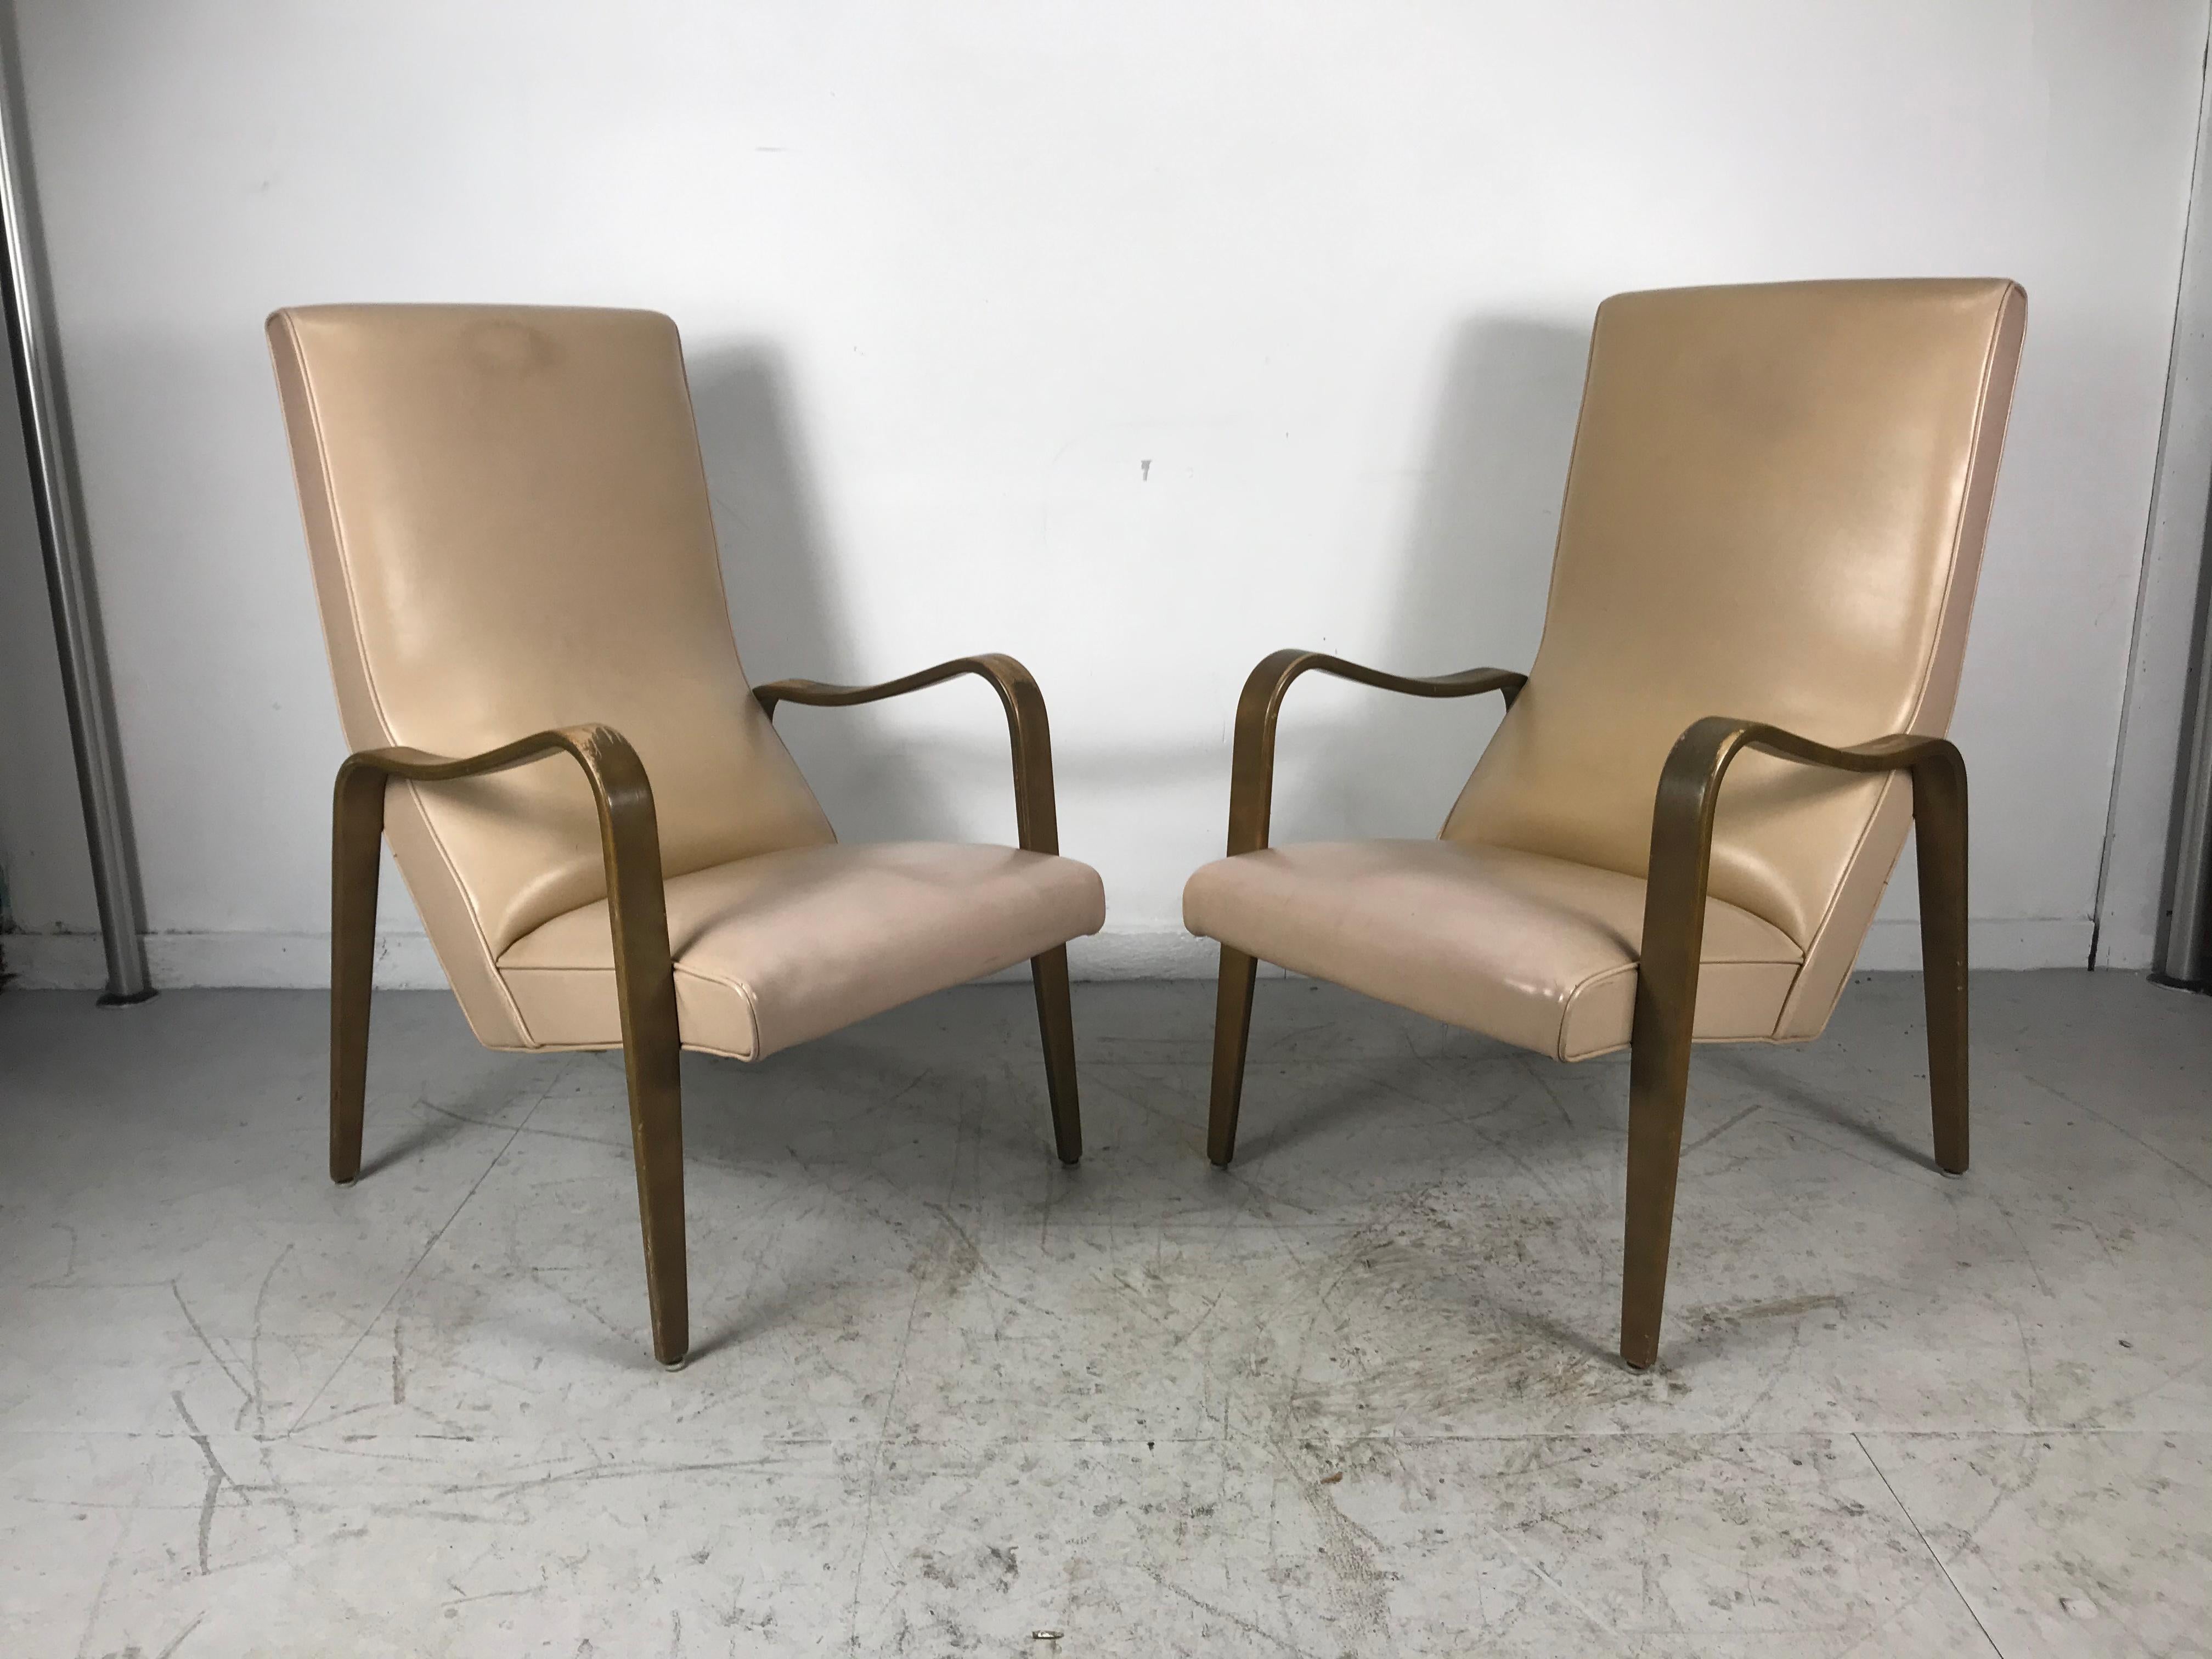 Pair of Classic Mid-Century Modern bentwood lounge chairs by Thonet, stunning lines, extremely comfortable, rare high back version, retain original finish, well worn finish, leaving it up to the buyers discretion, refinish, lacquer etc? Would be